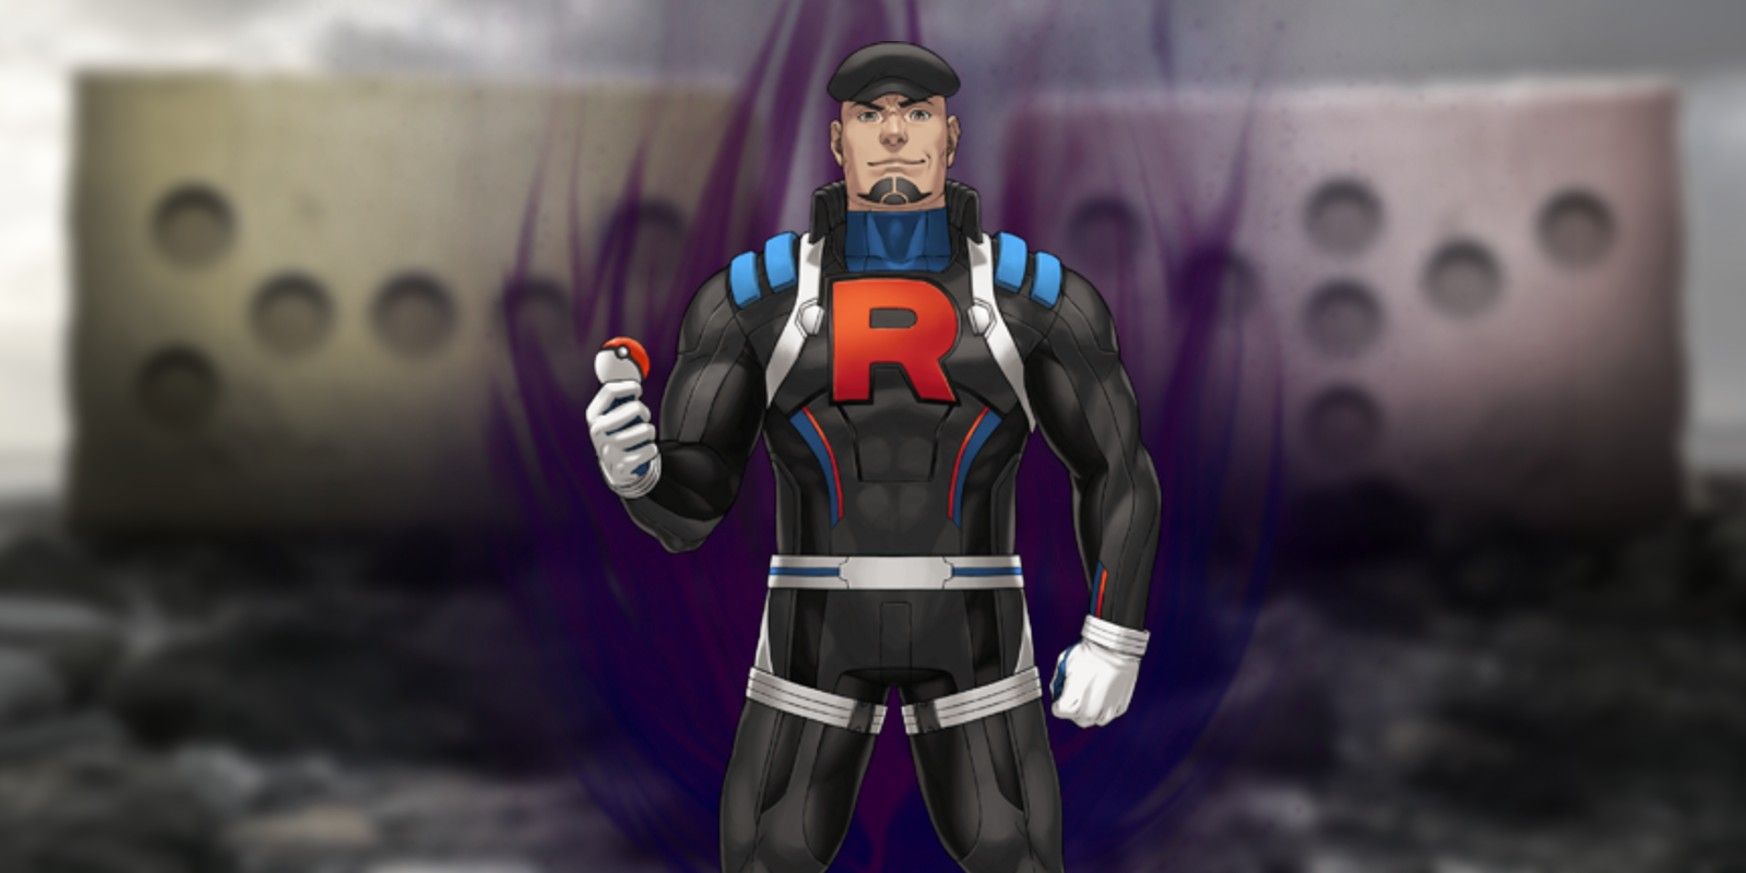 Pokemon GO's Cliff holds a Poké Ball in the middle while a dark energy cloud forms behind him. In the background is the key art for Season 10: Rising Heroes with symbols that represent Regieleki and Regidrago.